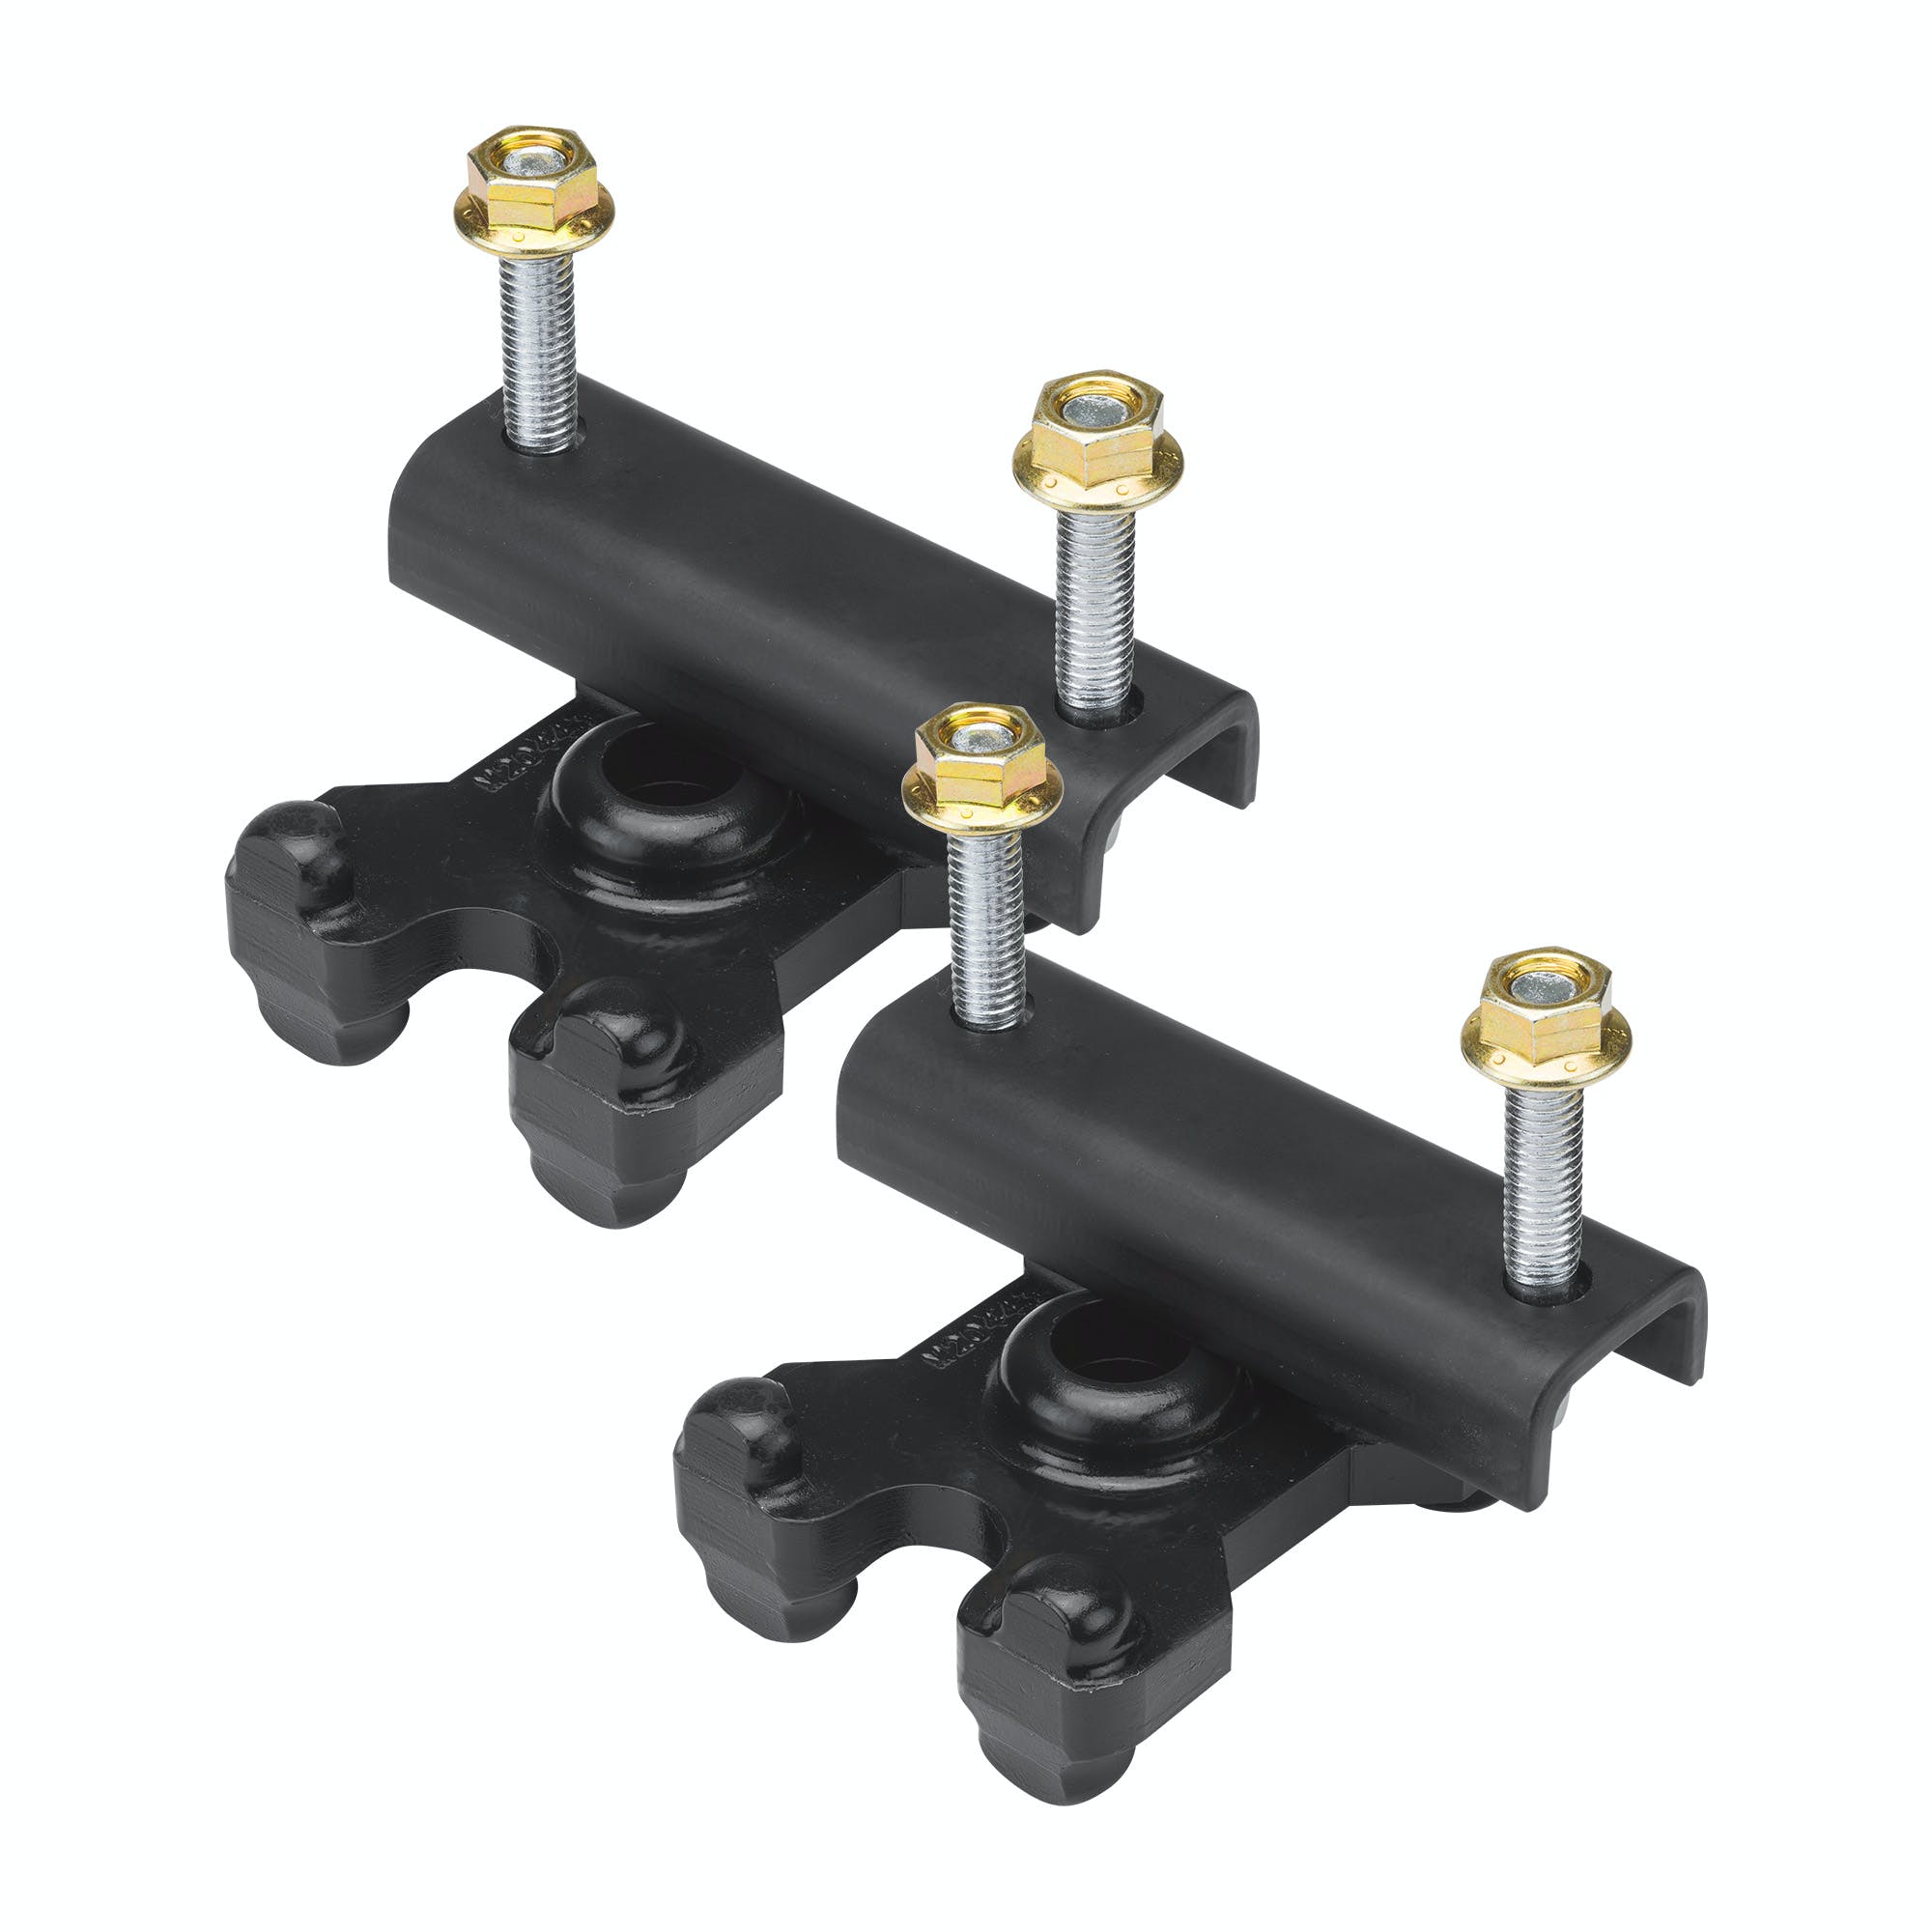 SuperSprings P7KT Mounting Kit used for specified SuperSprings applications